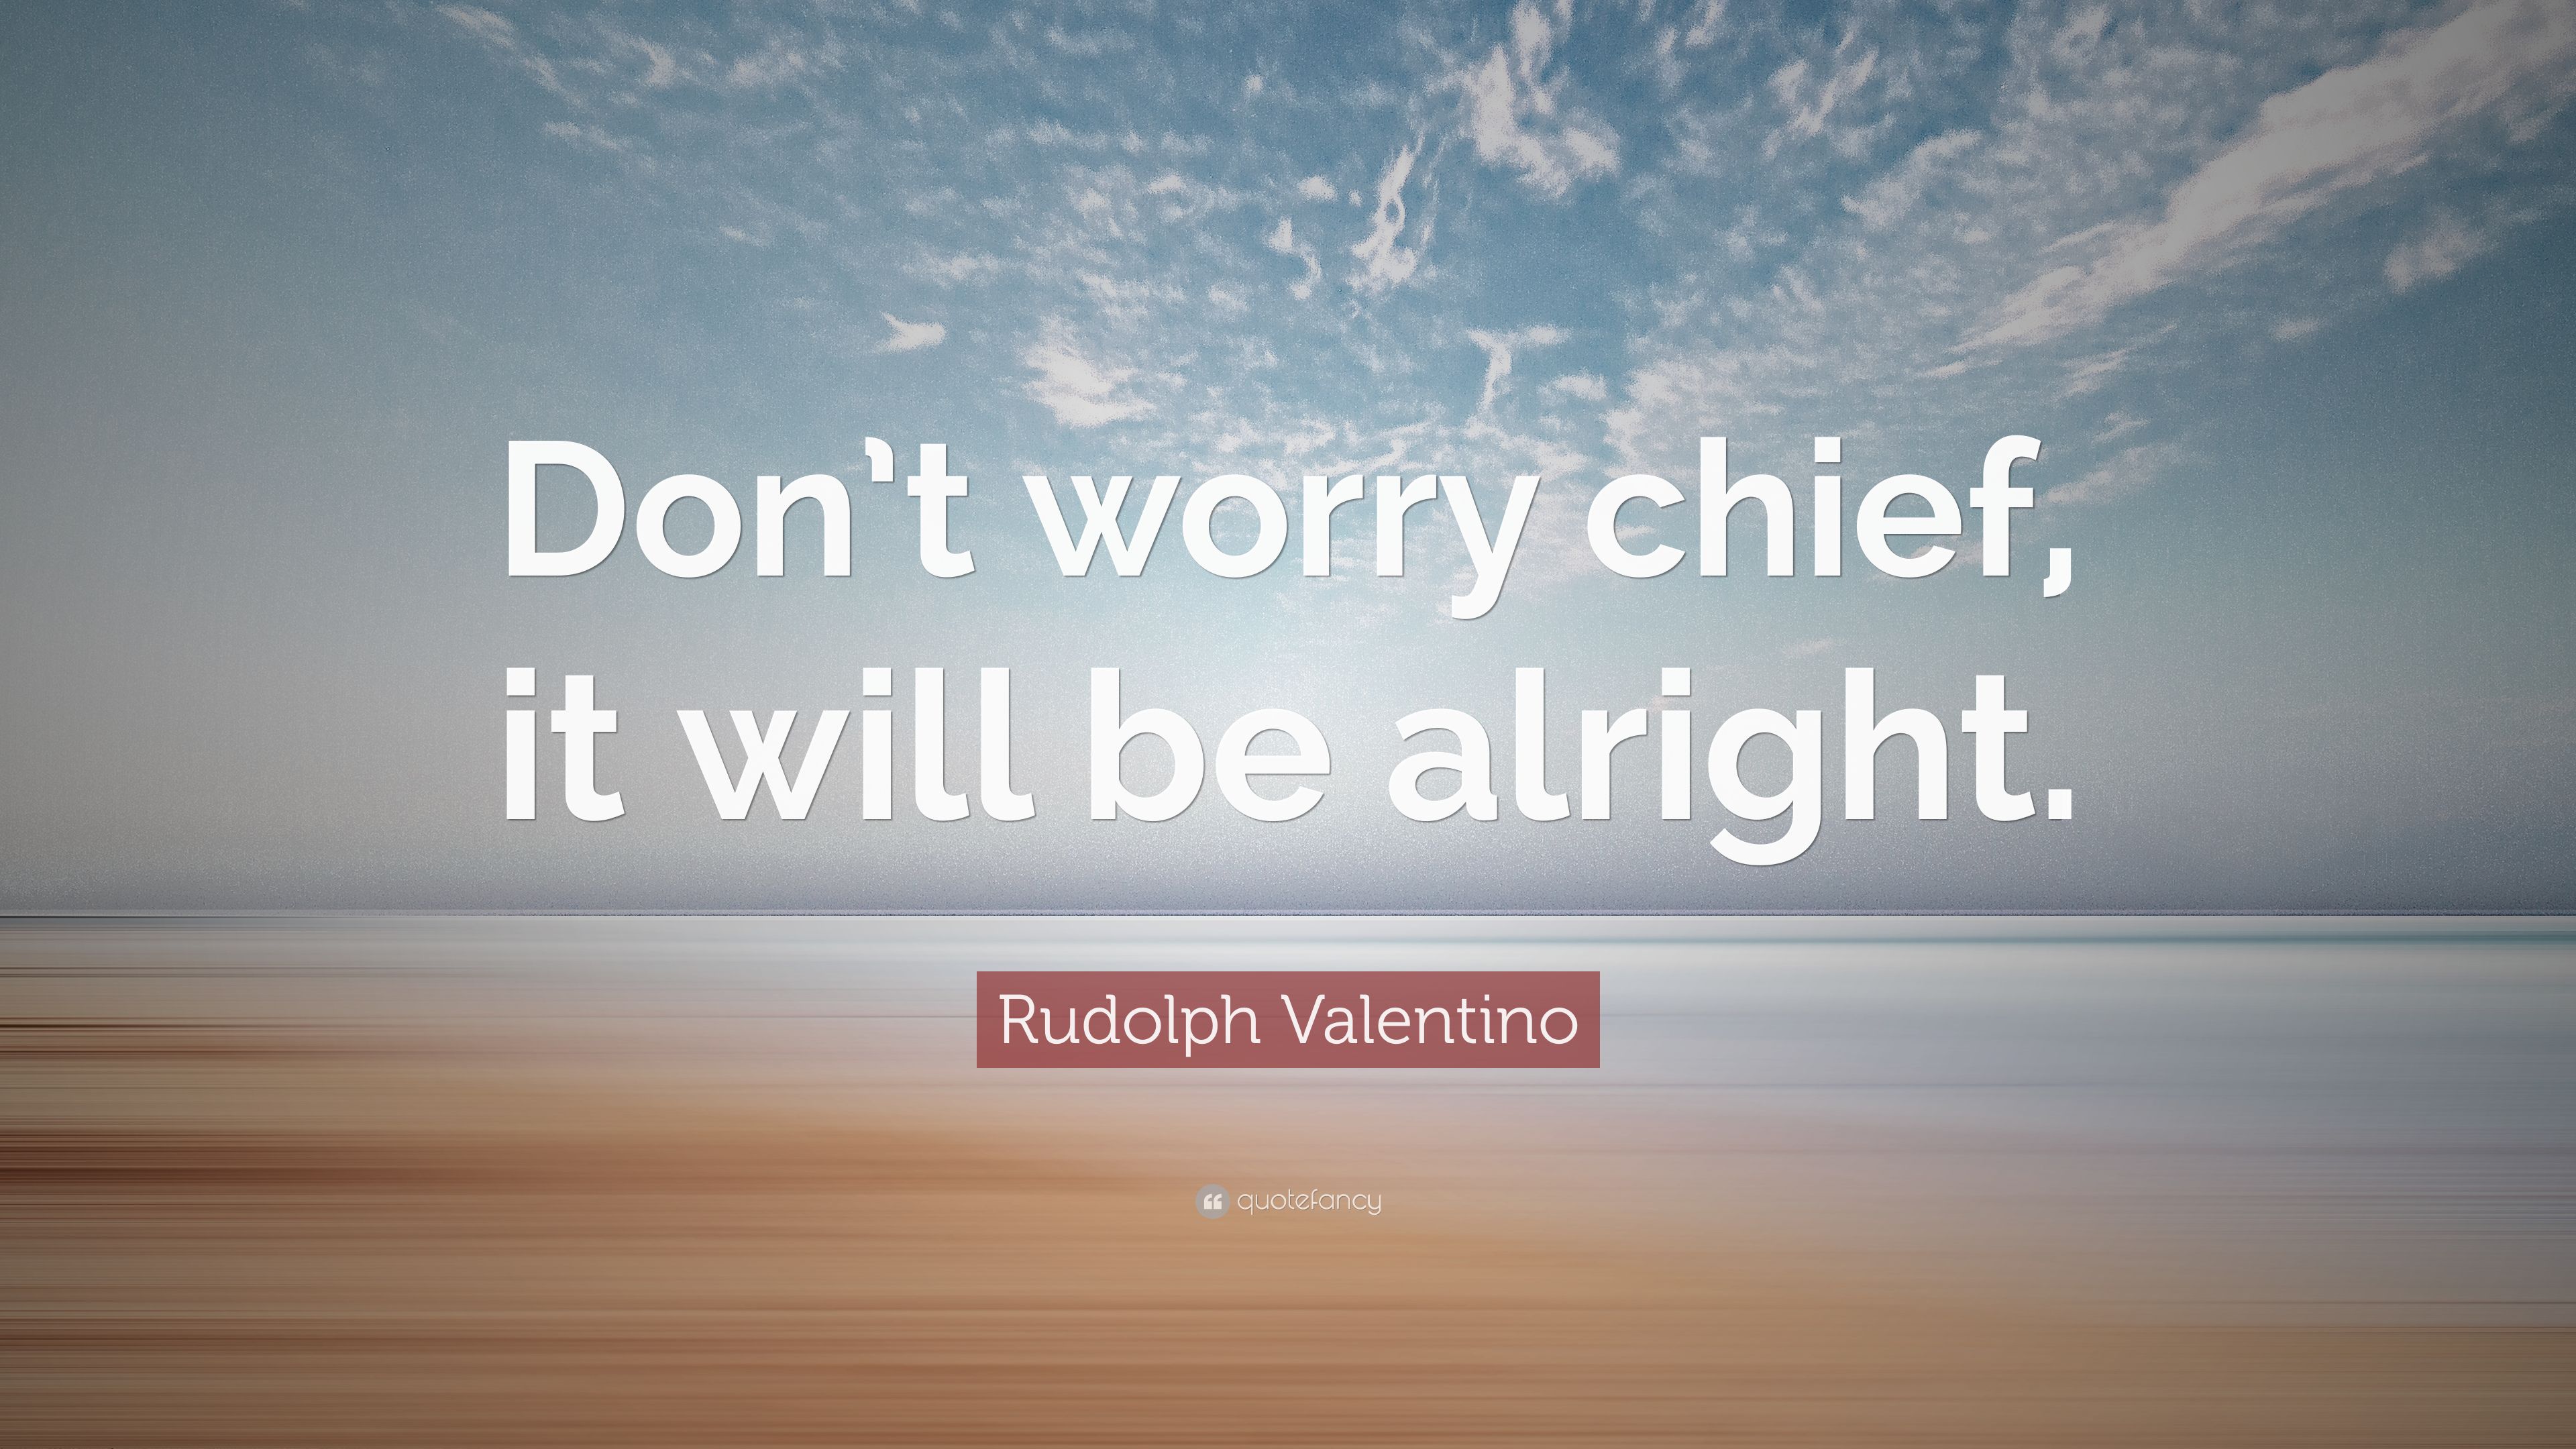 Rudolph Valentino Quote: “Don't worry chief, it will be alright.” (7 wallpaper)